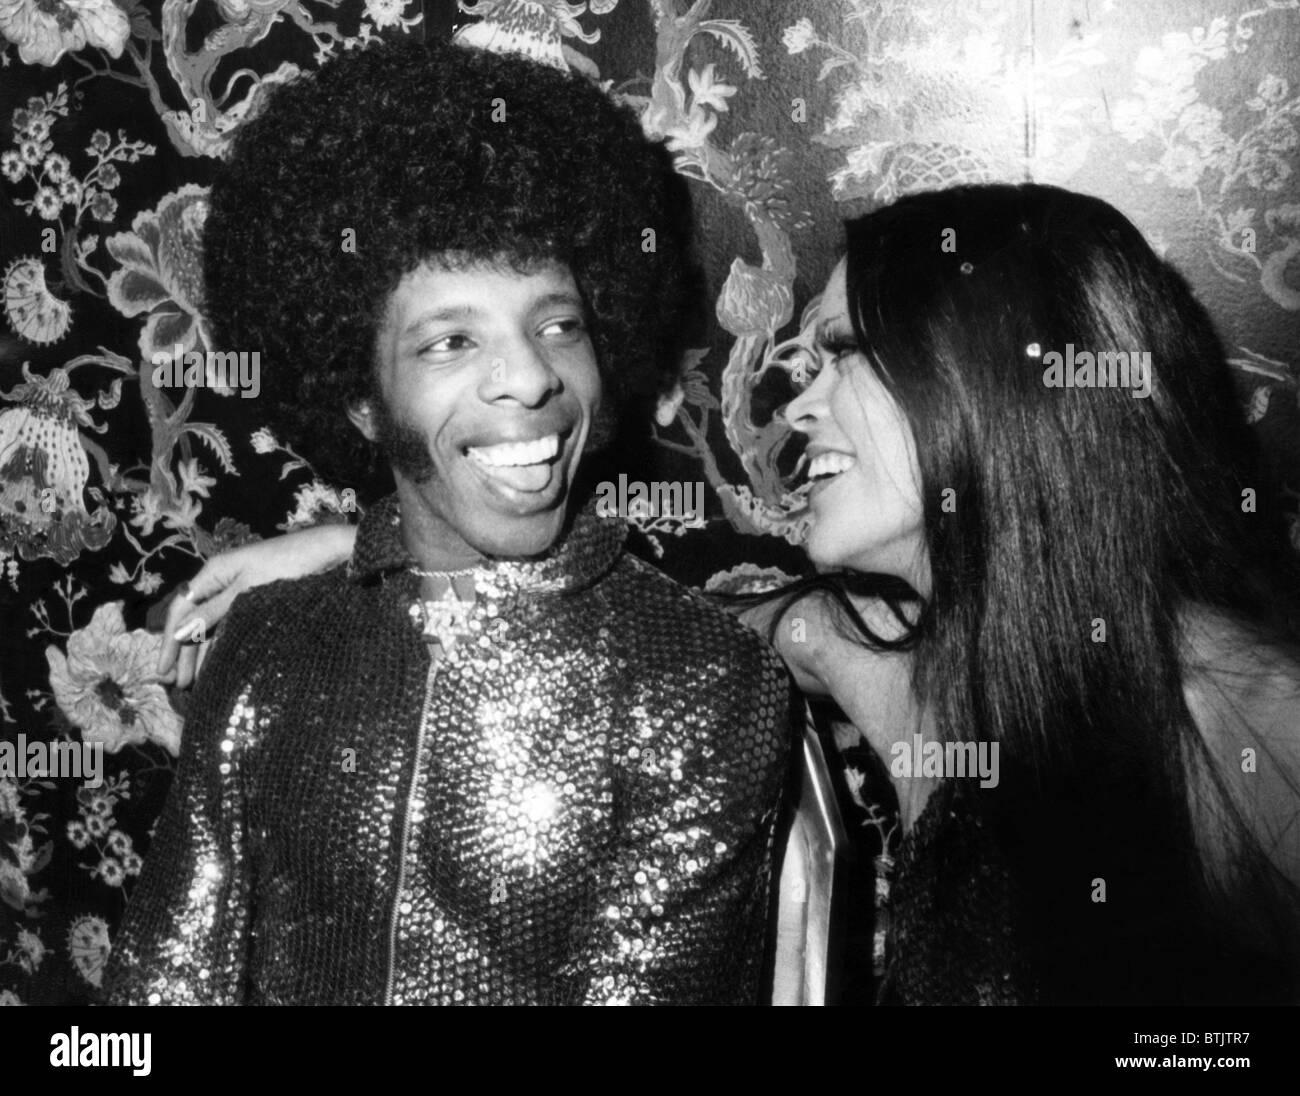 Sly Stone, of Sly & the Family Stone, and his wife, Kathy Silva, Circa 1974. CSU Archives/Courtesy Everett Collection Stock Photo